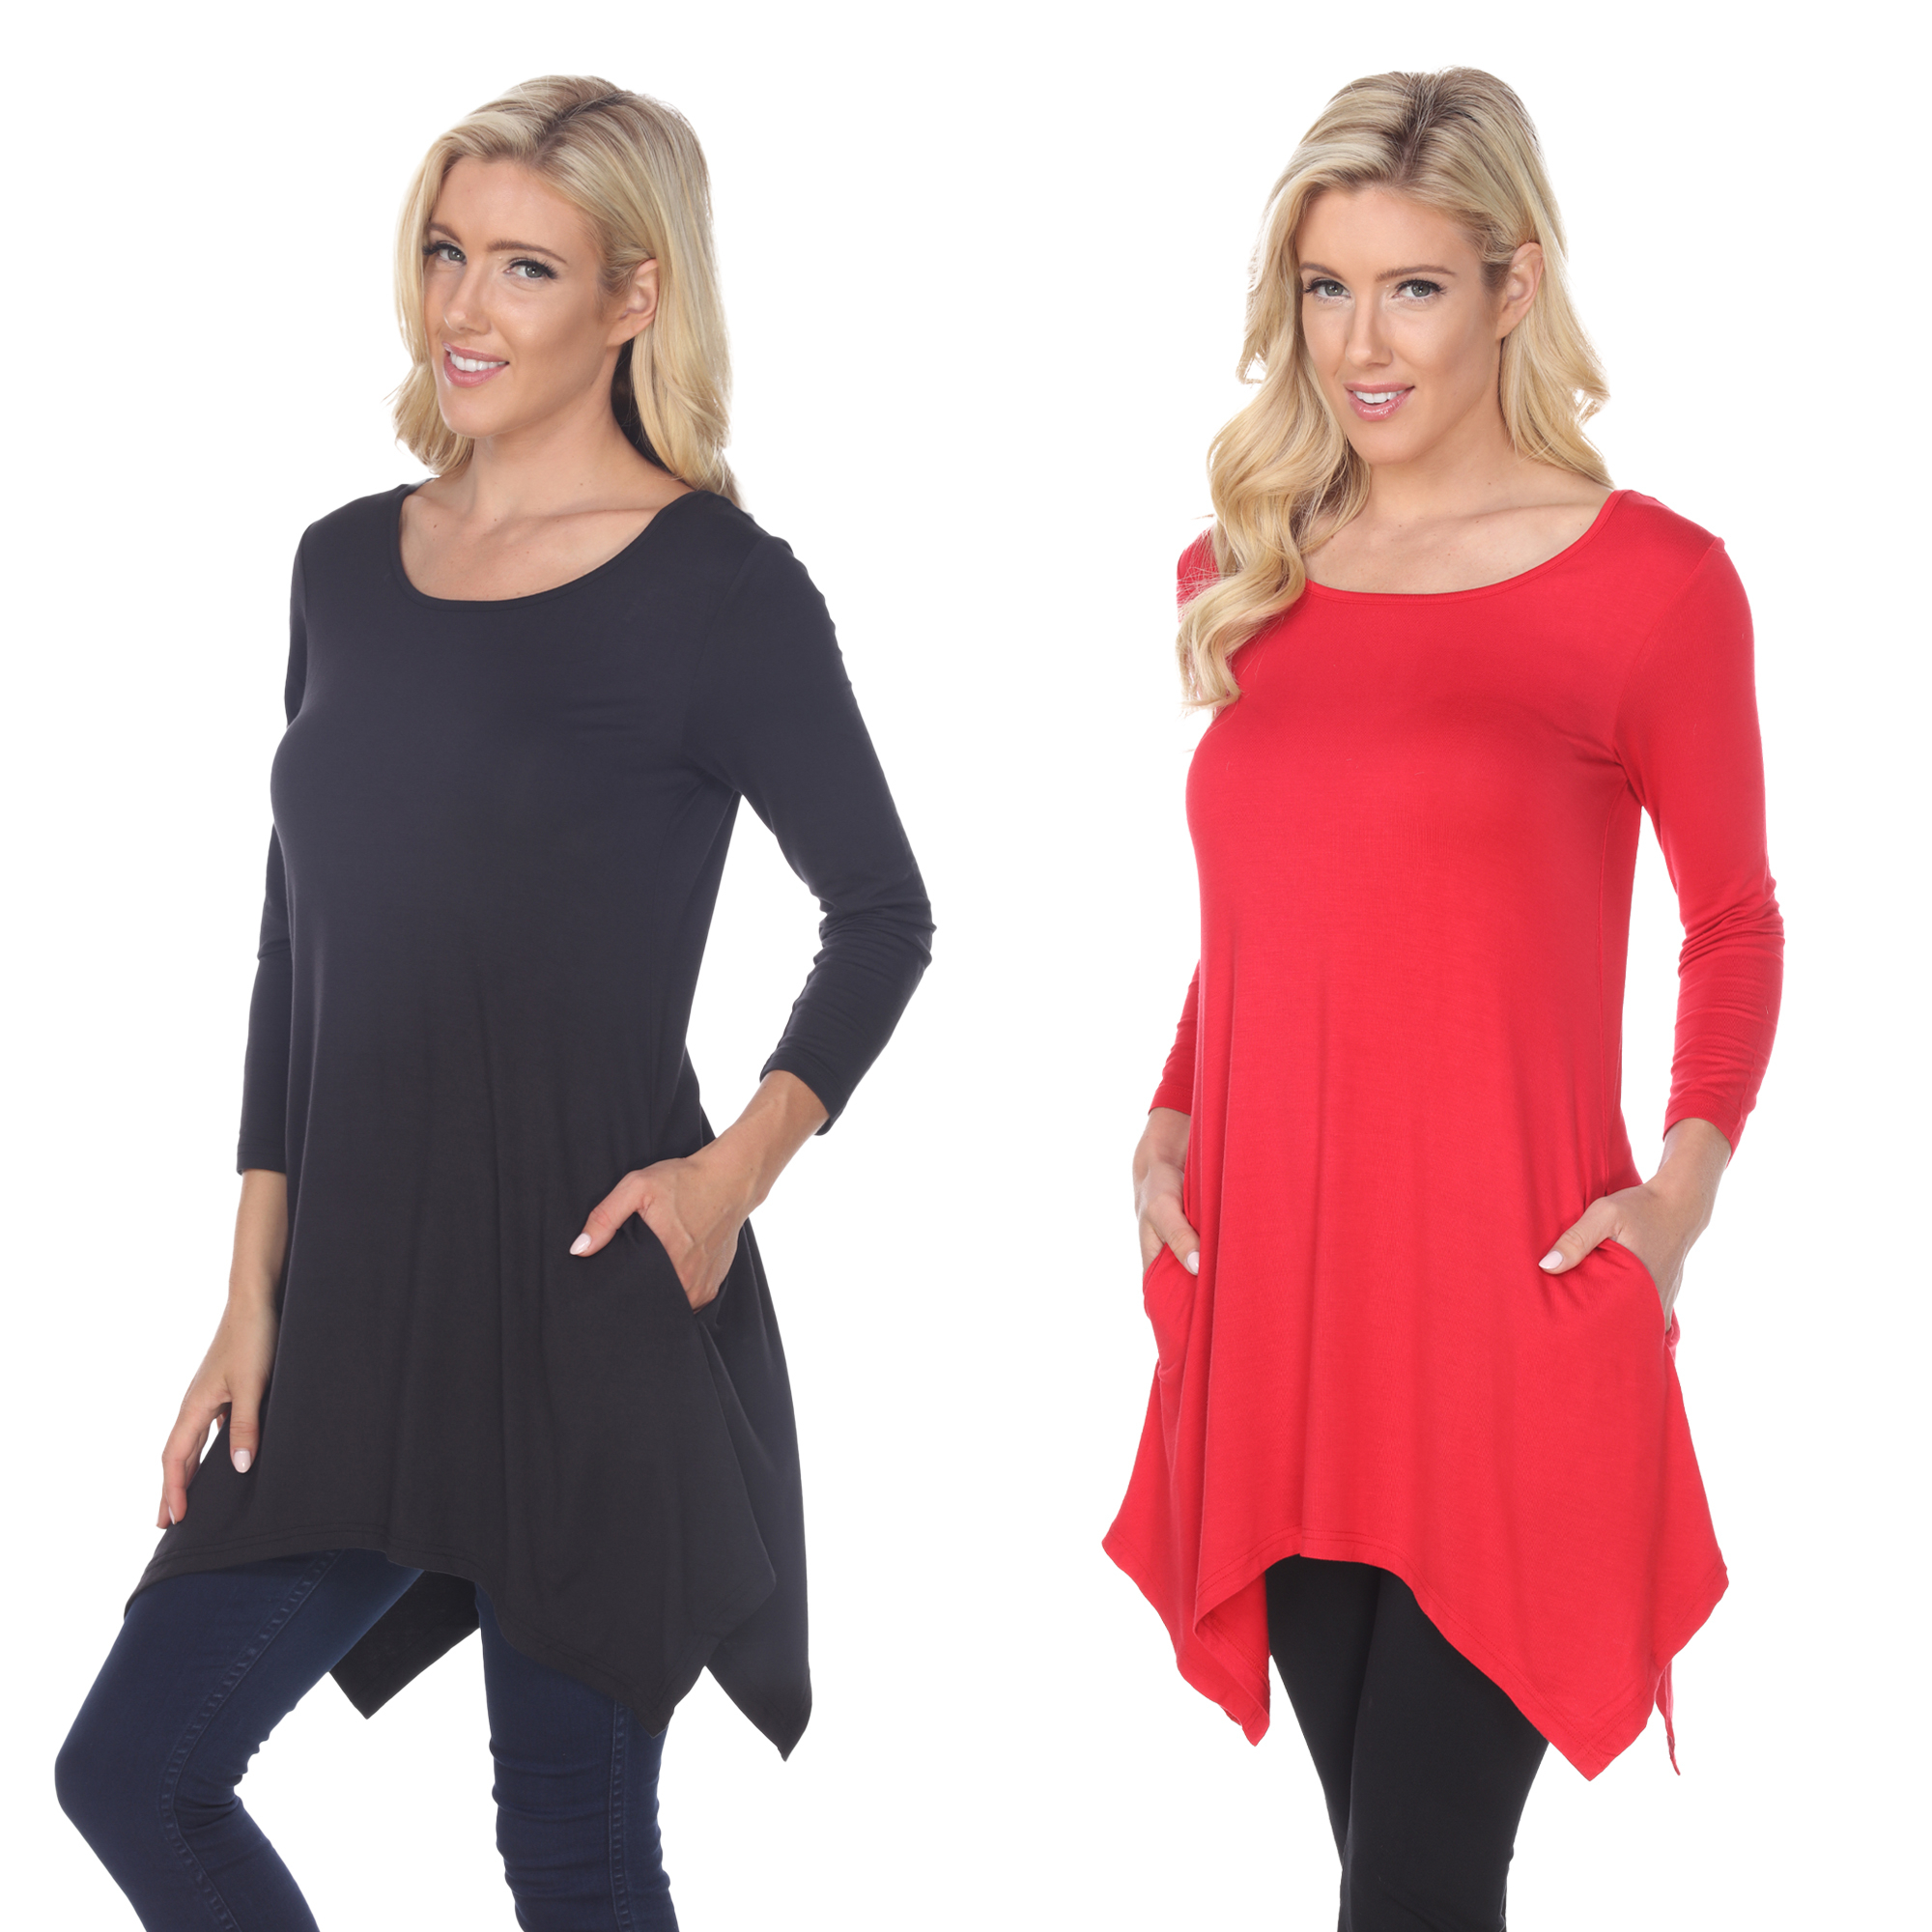 White Mark Women's Pack Of 2 Black Tunic Top - Black, Red, Small